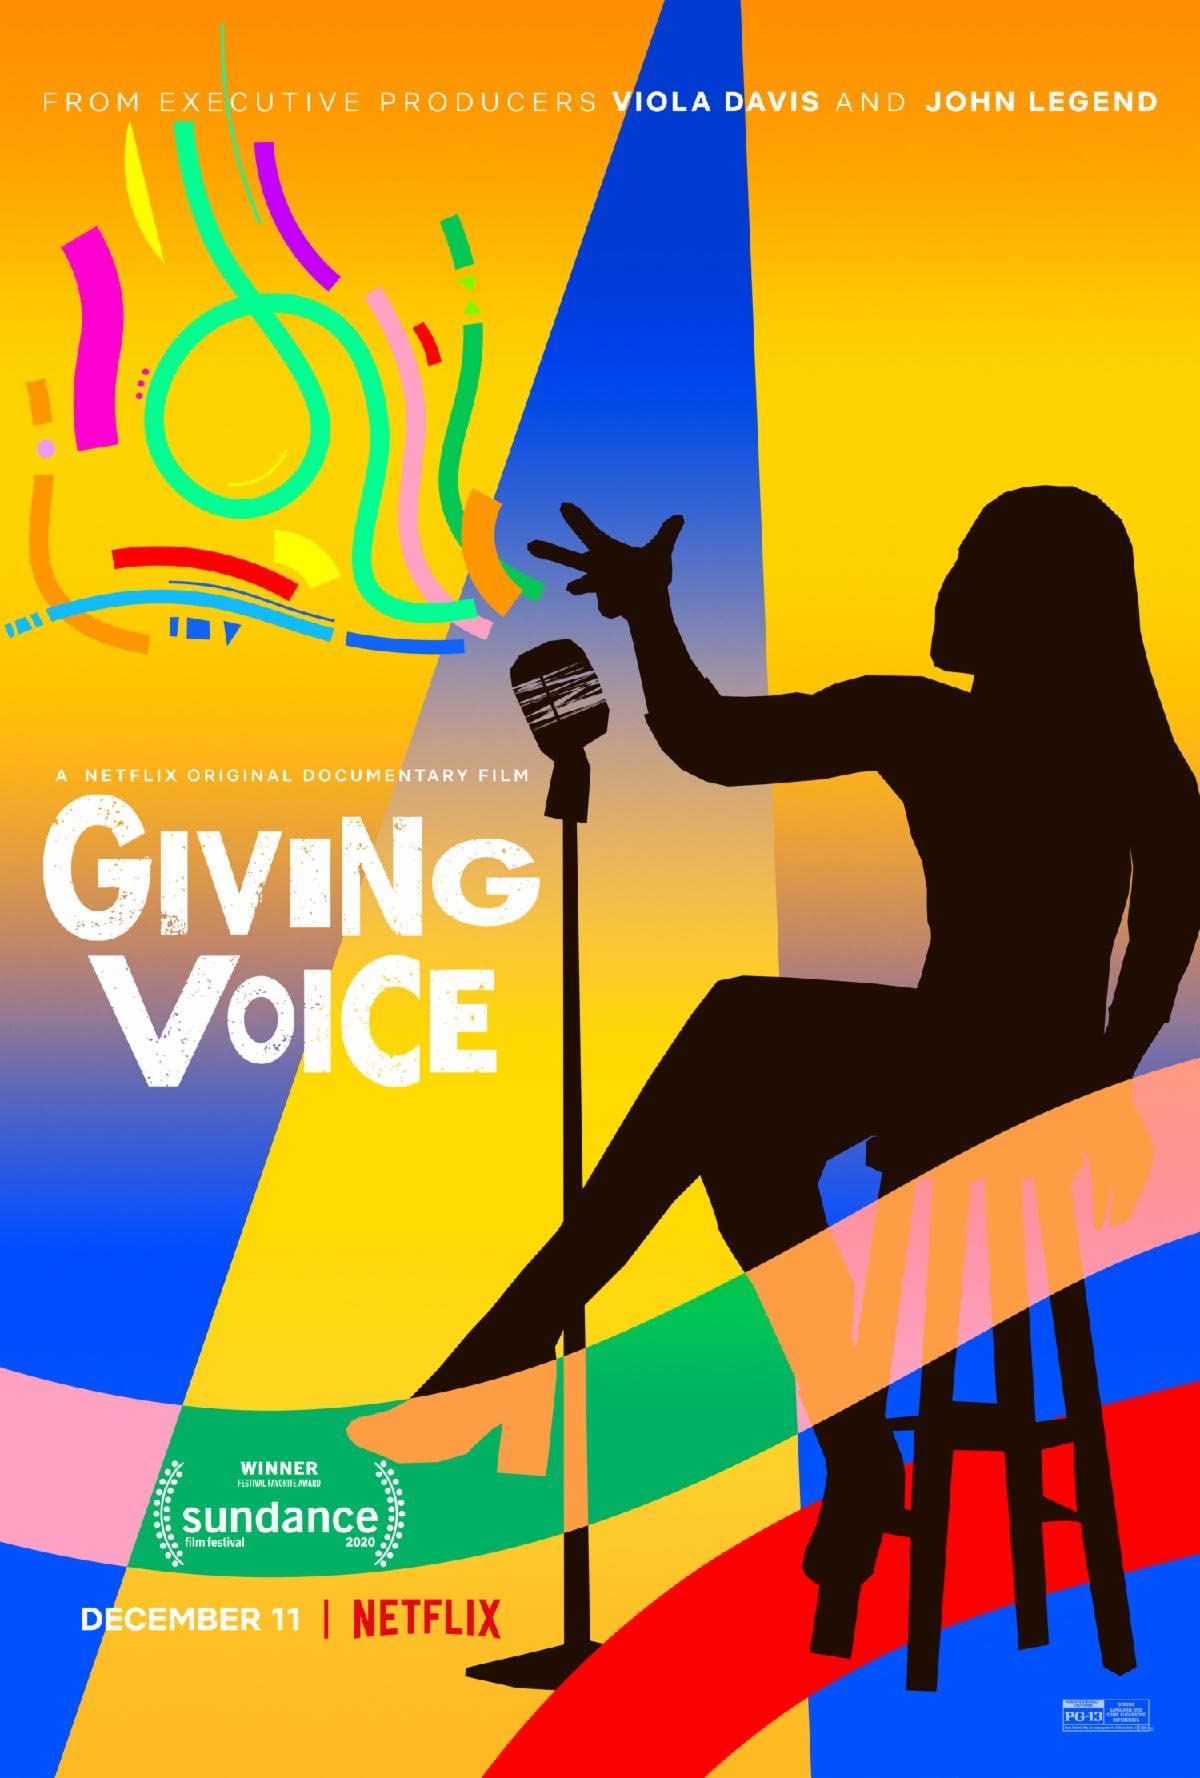 🎬 Giving Voice [TRAILER] Coming to Netflix December 11, 2020 1